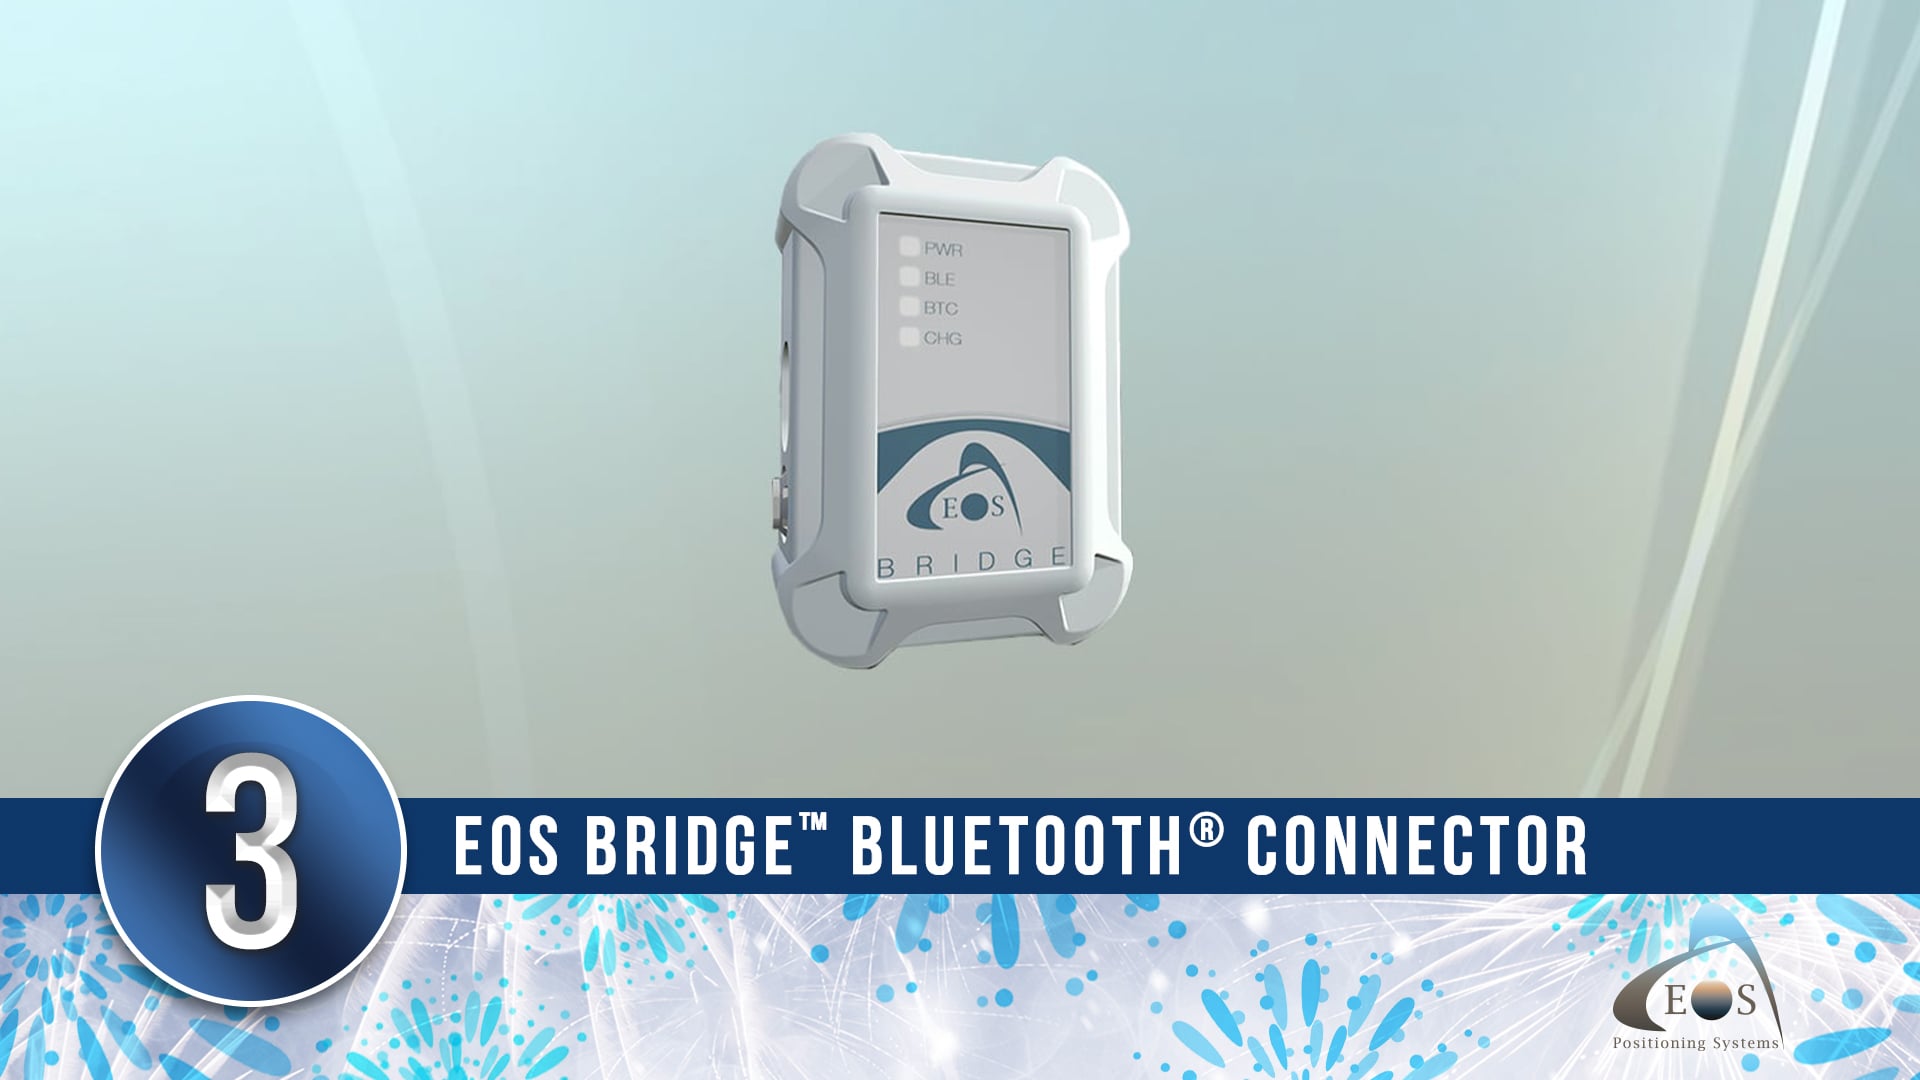 Top 10 of 2021 - 3 Eos Bridge Bluetooth Connector for Arrow GNSS Receivers